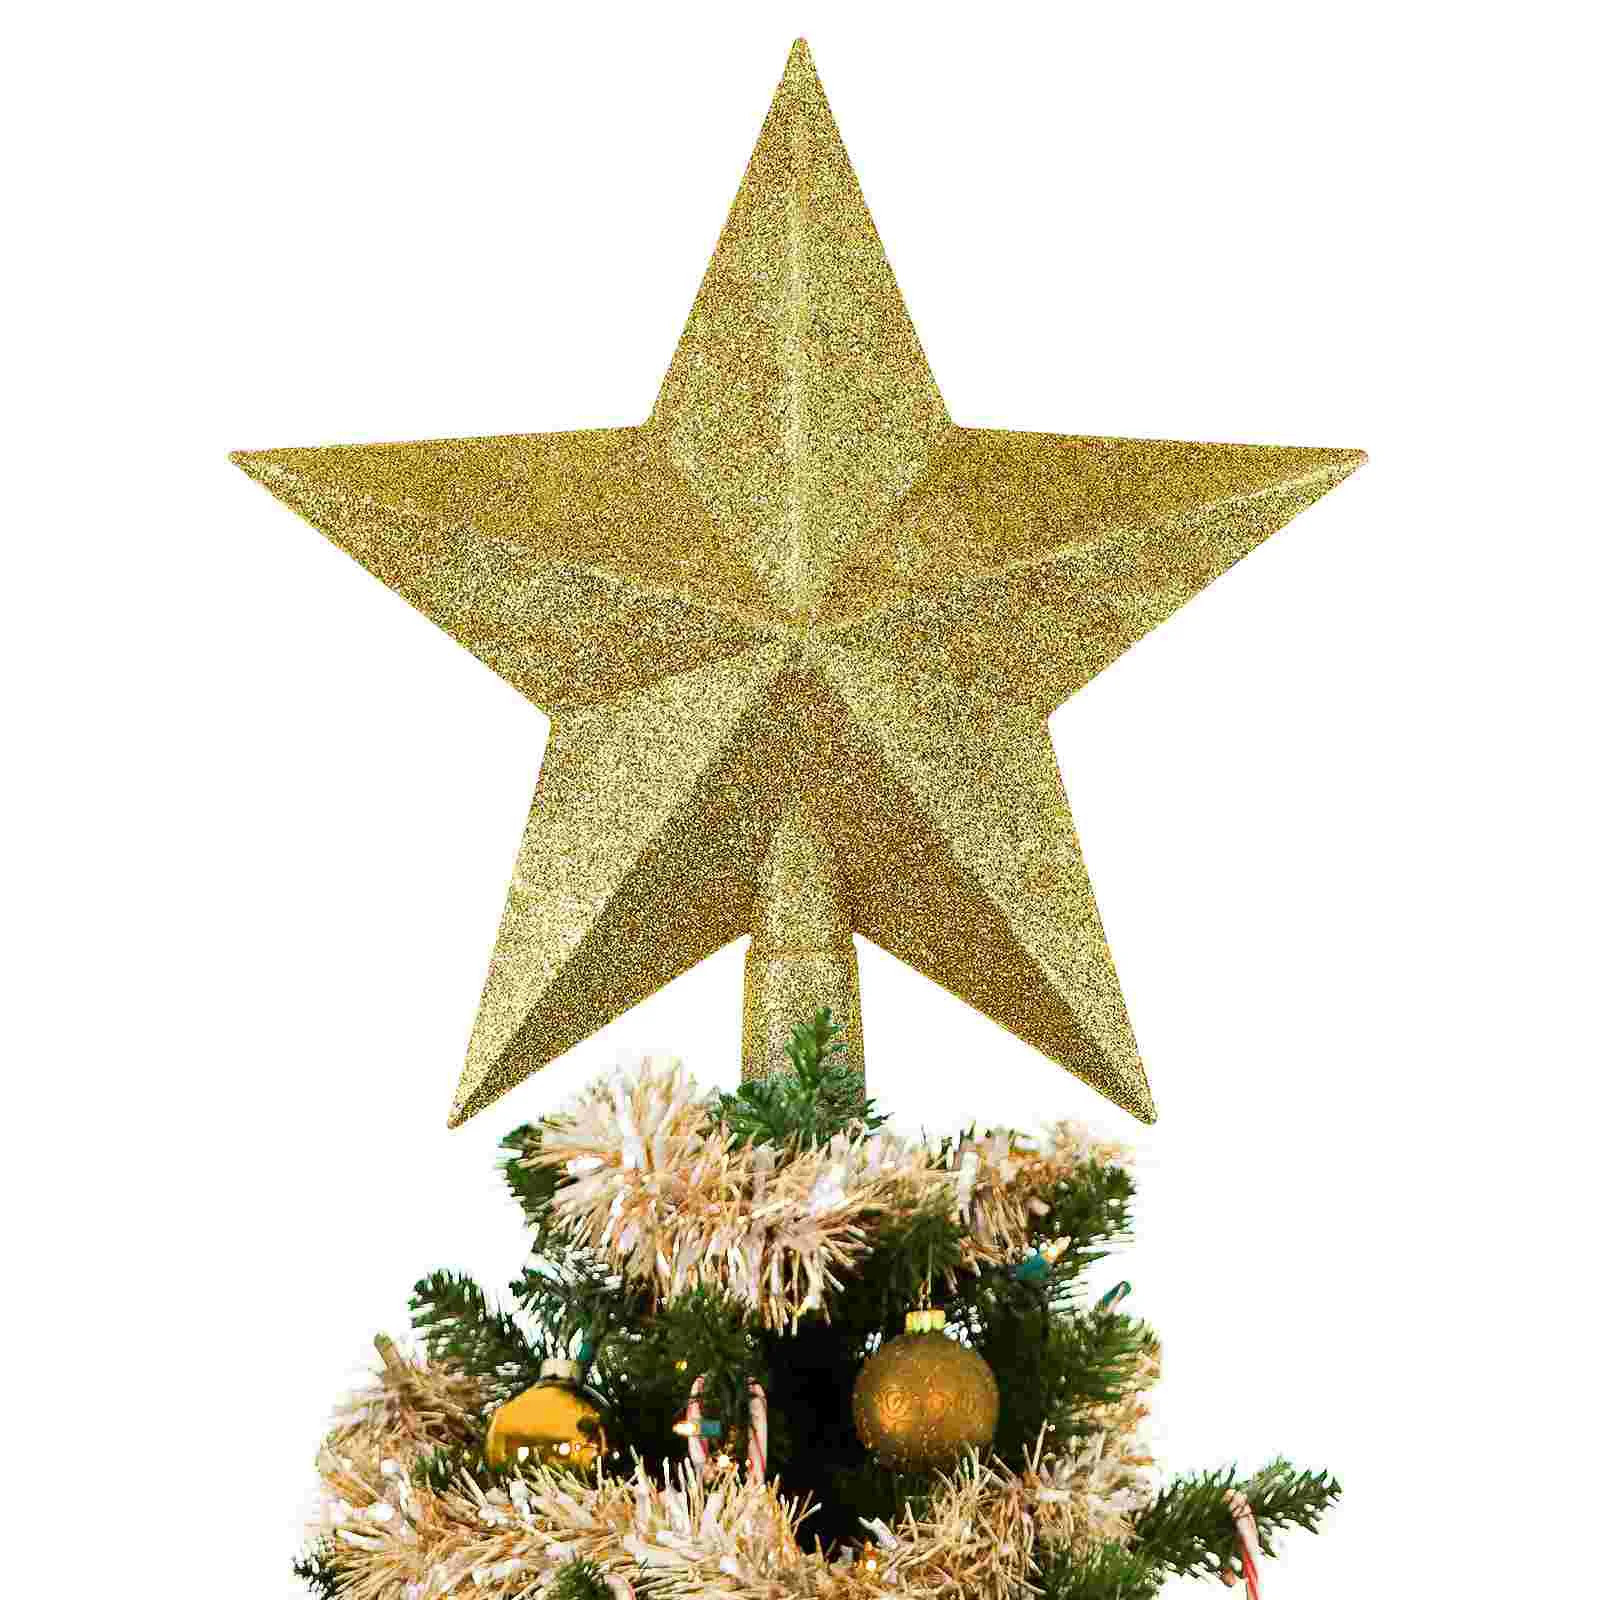 

Festival Decorations Solid Star Tree Topper Christmas Gold Ornaments Glitter Five-point Treetop